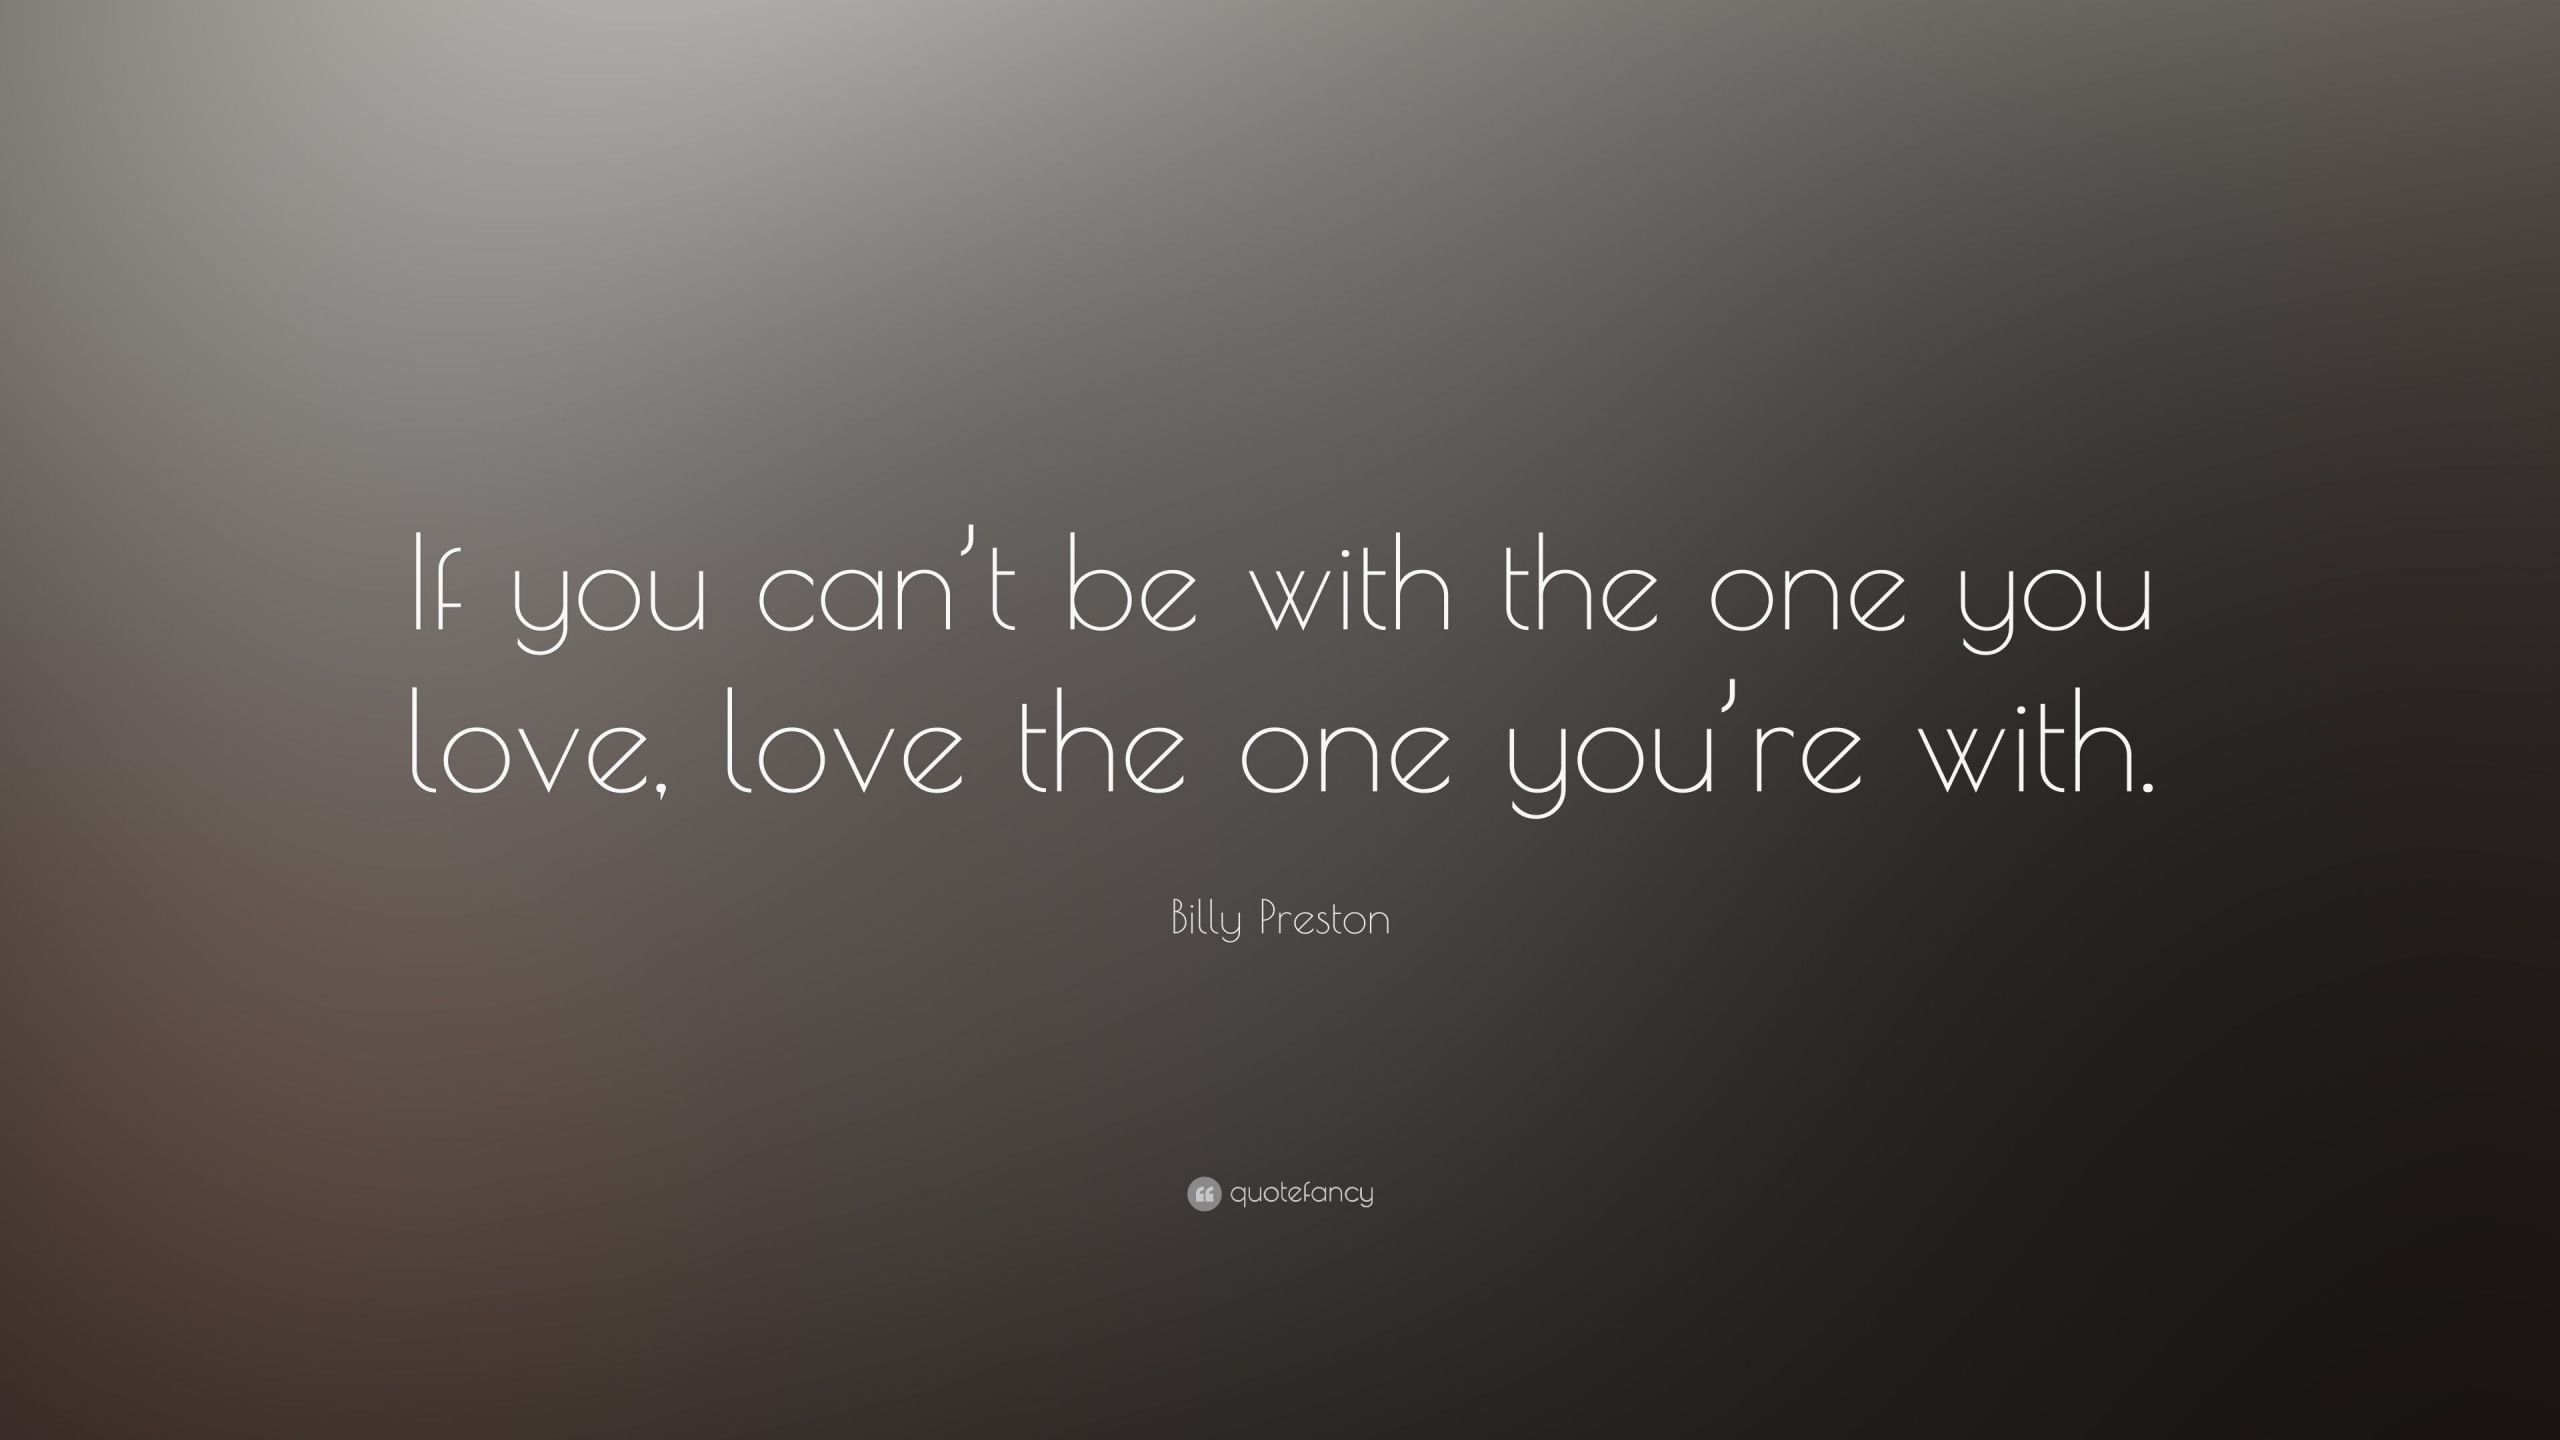 Quotes For The One You Love
 Billy Preston Quote “If you can’t be with the one you